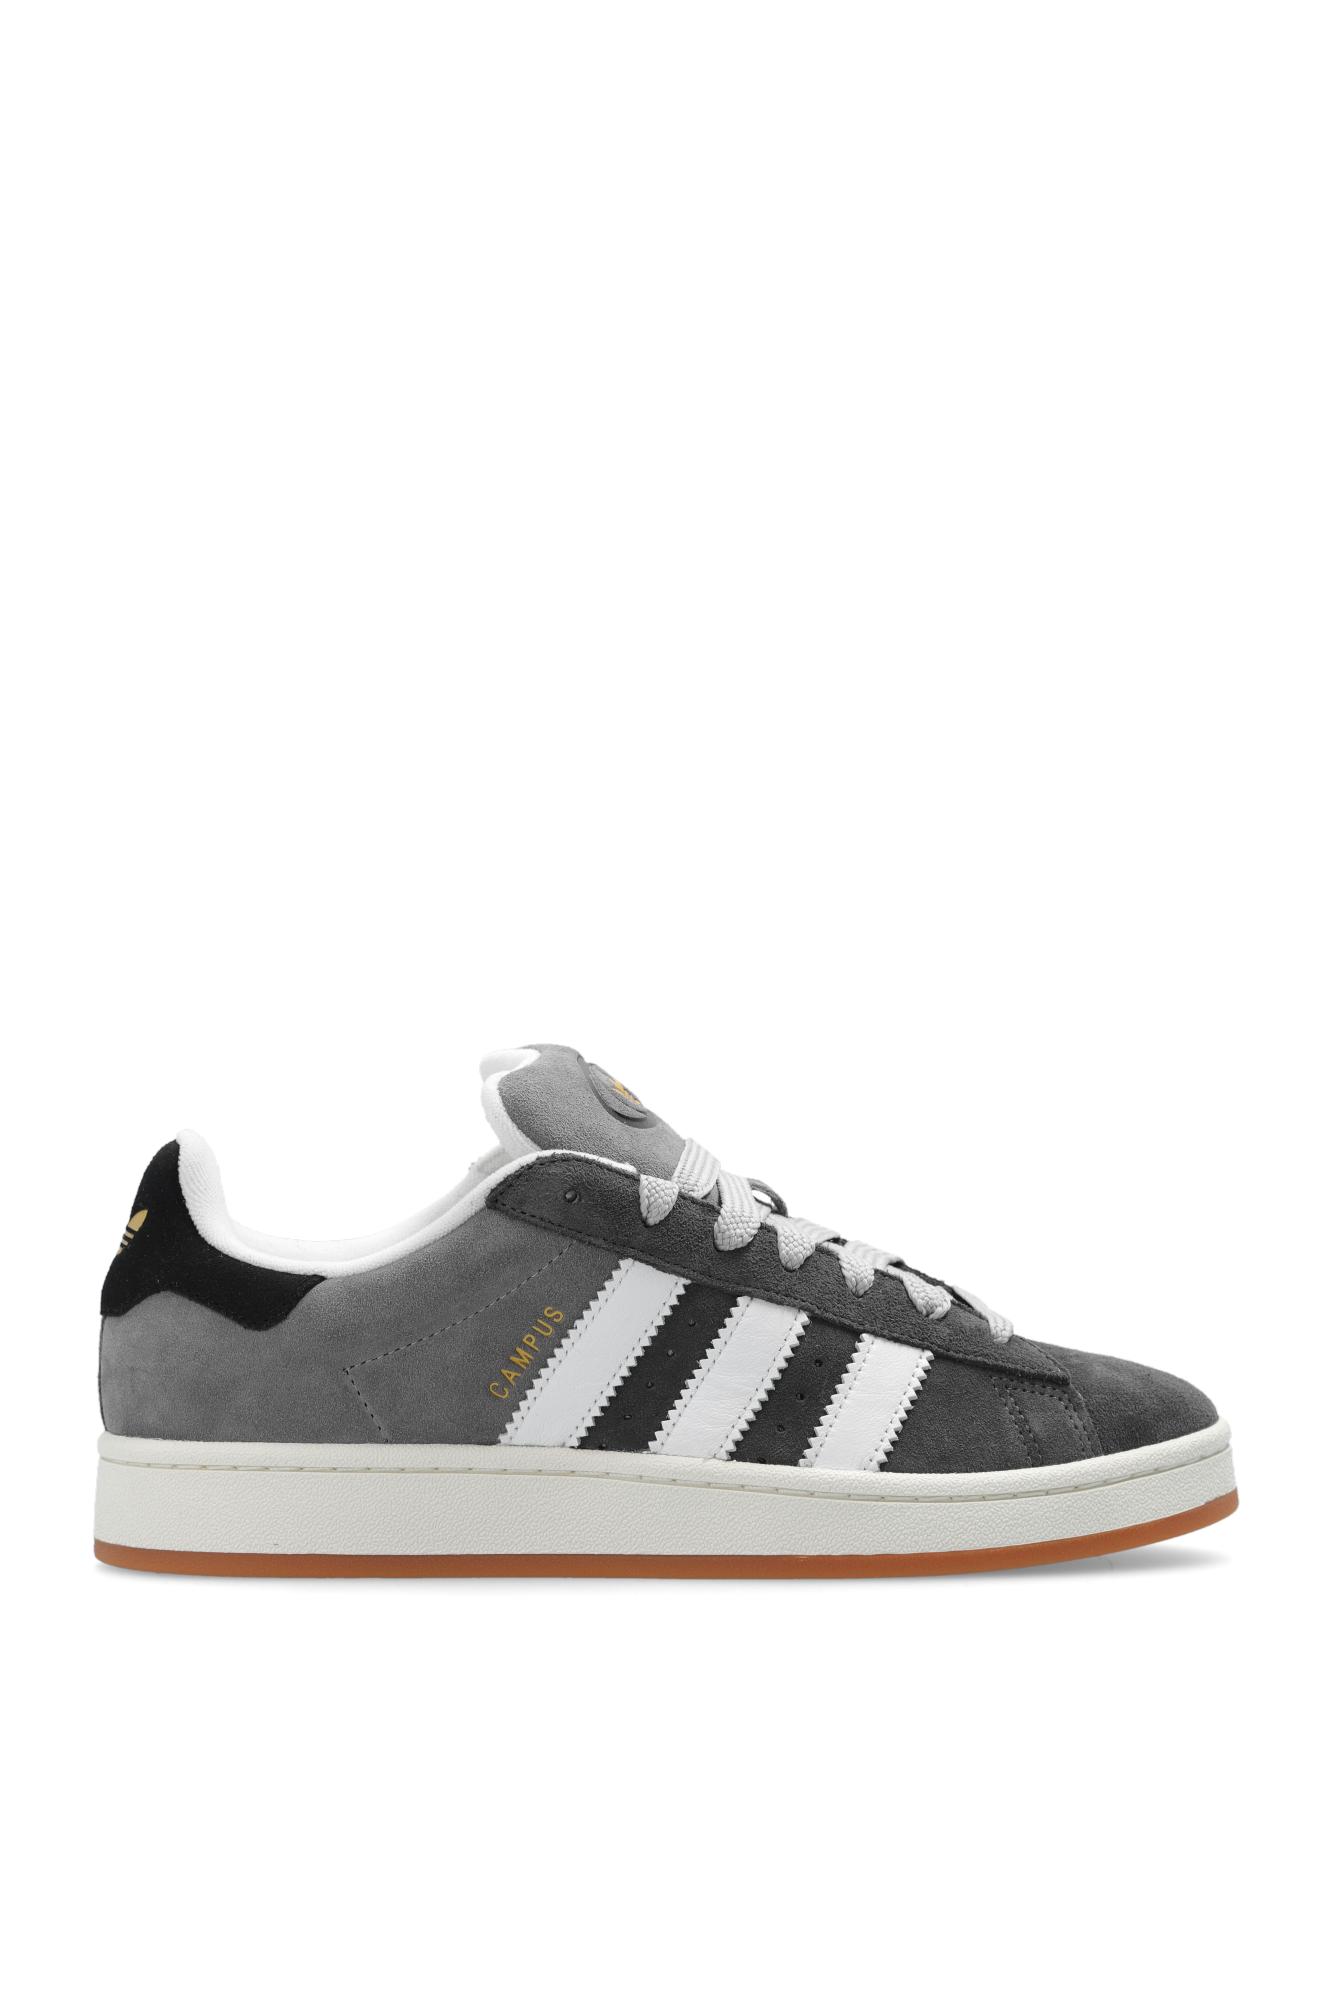 Details 194+ adidas campus sneakers grey latest